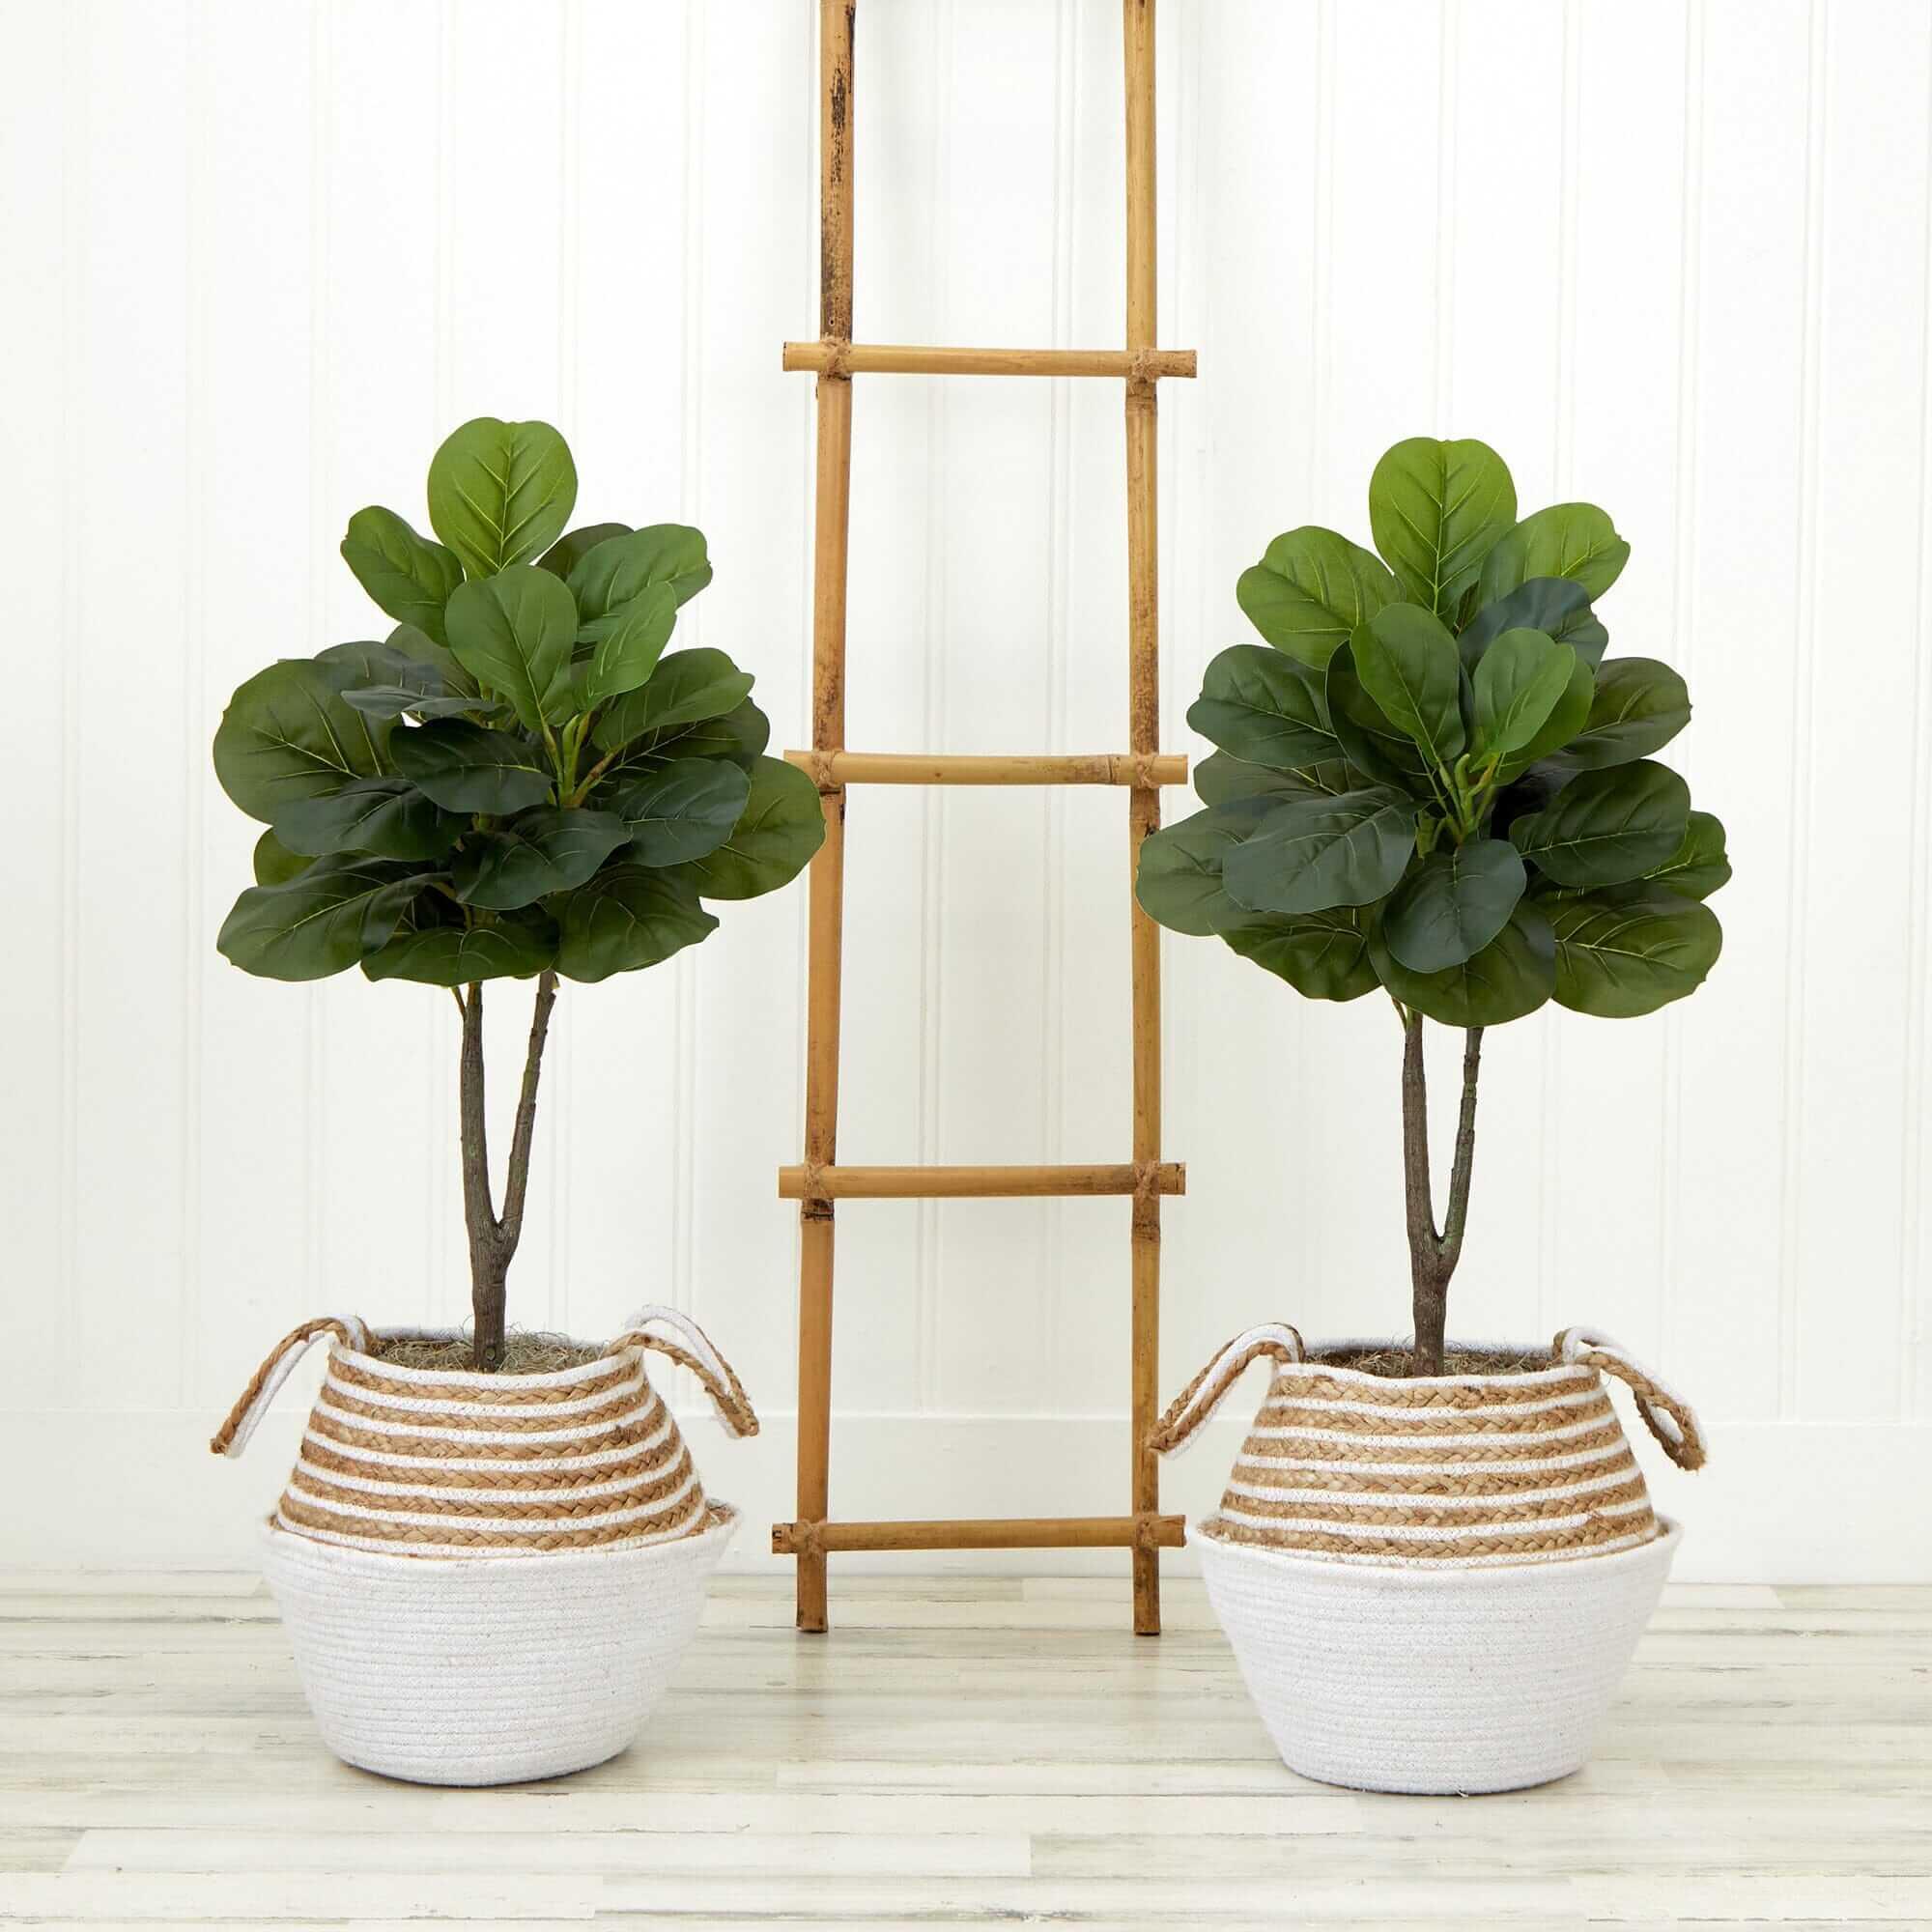 ethically sourced 3’ Artificial Fiddle Leaf Fig Tree with Handmade Woven Planter DIY Kit - Set of 2 Life In Alignment